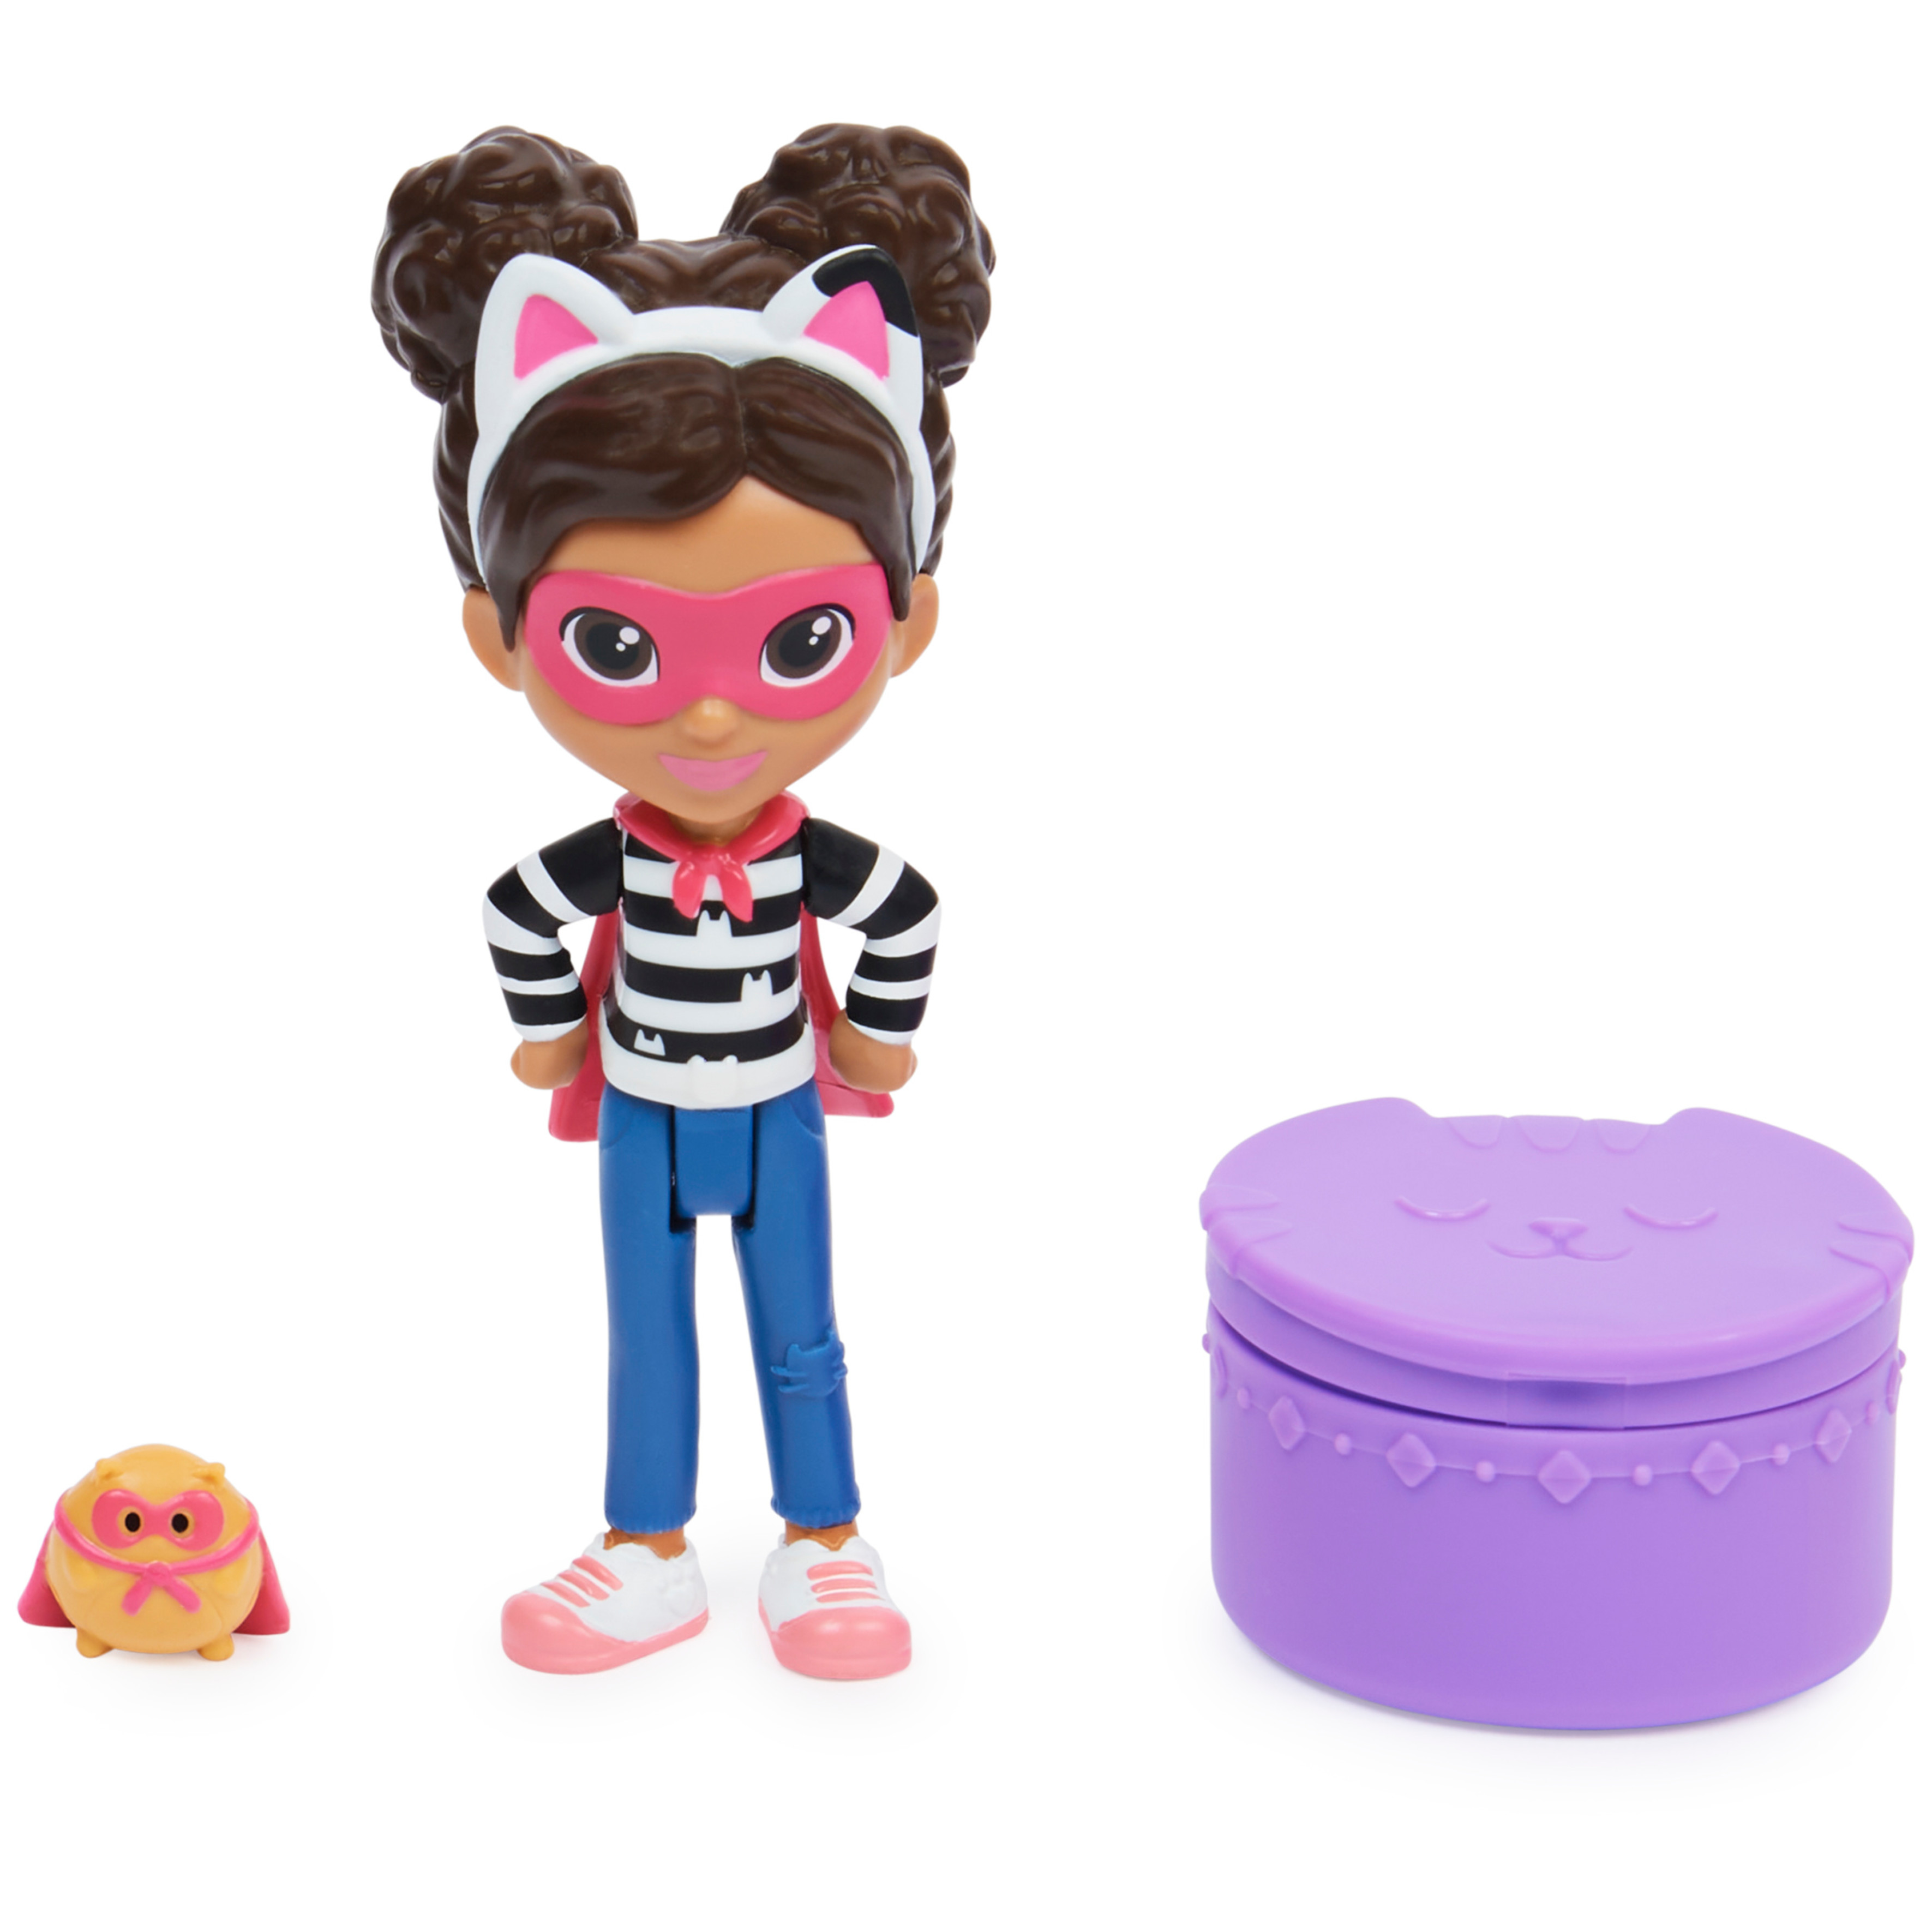 Gabby’s Dollhouse, Friendship Pack with Gabby Girl - image 1 of 6